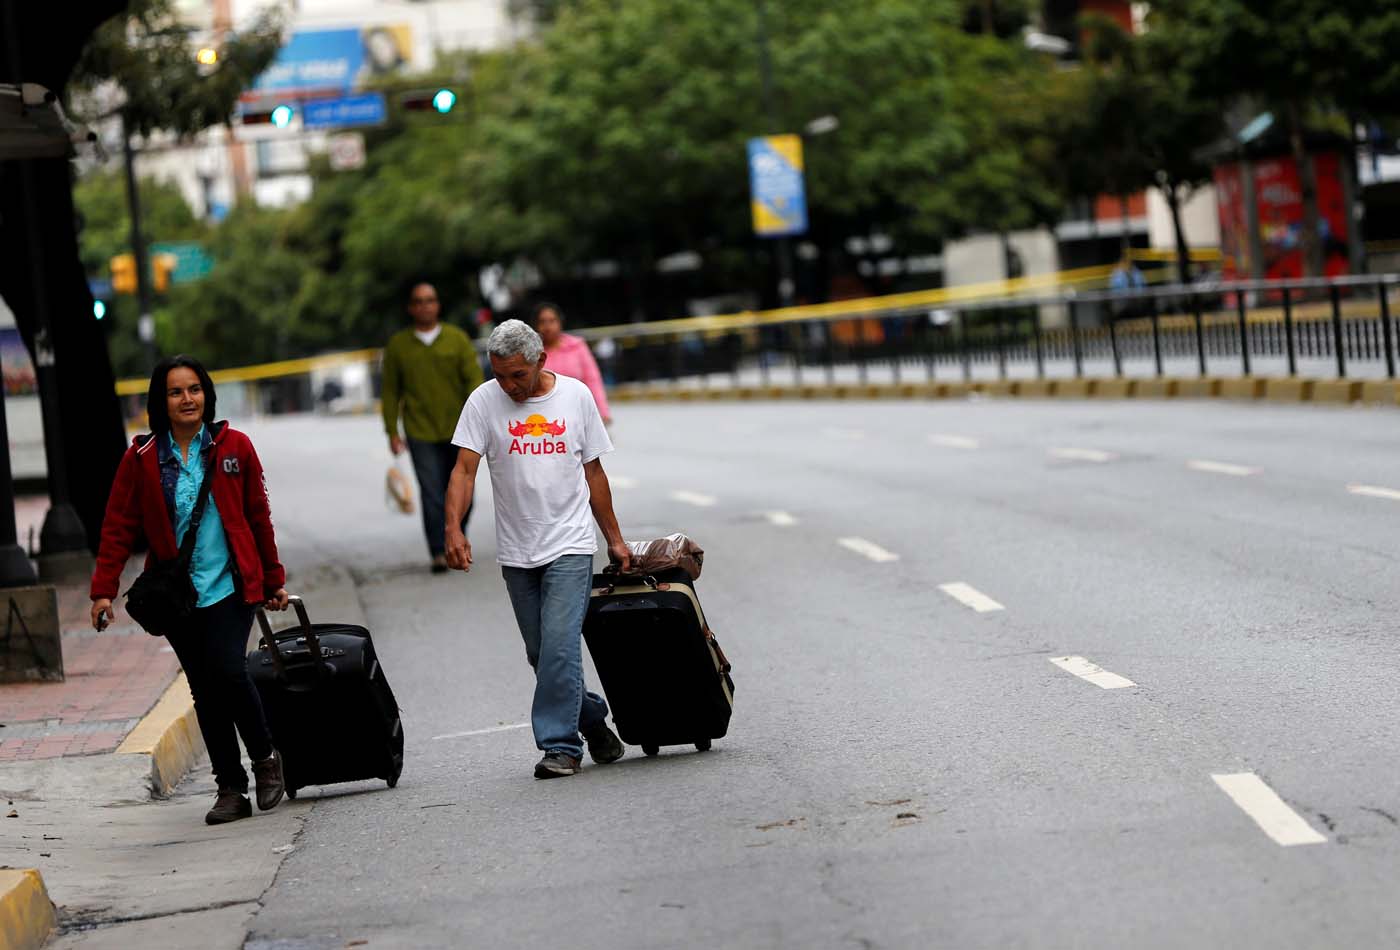 People walk along an empty road during a strike called to protest against Venezuelan President Nicolas Maduro's government in Caracas, Venezuela, July 20, 2017. REUTERS/Andres Martinez Casares